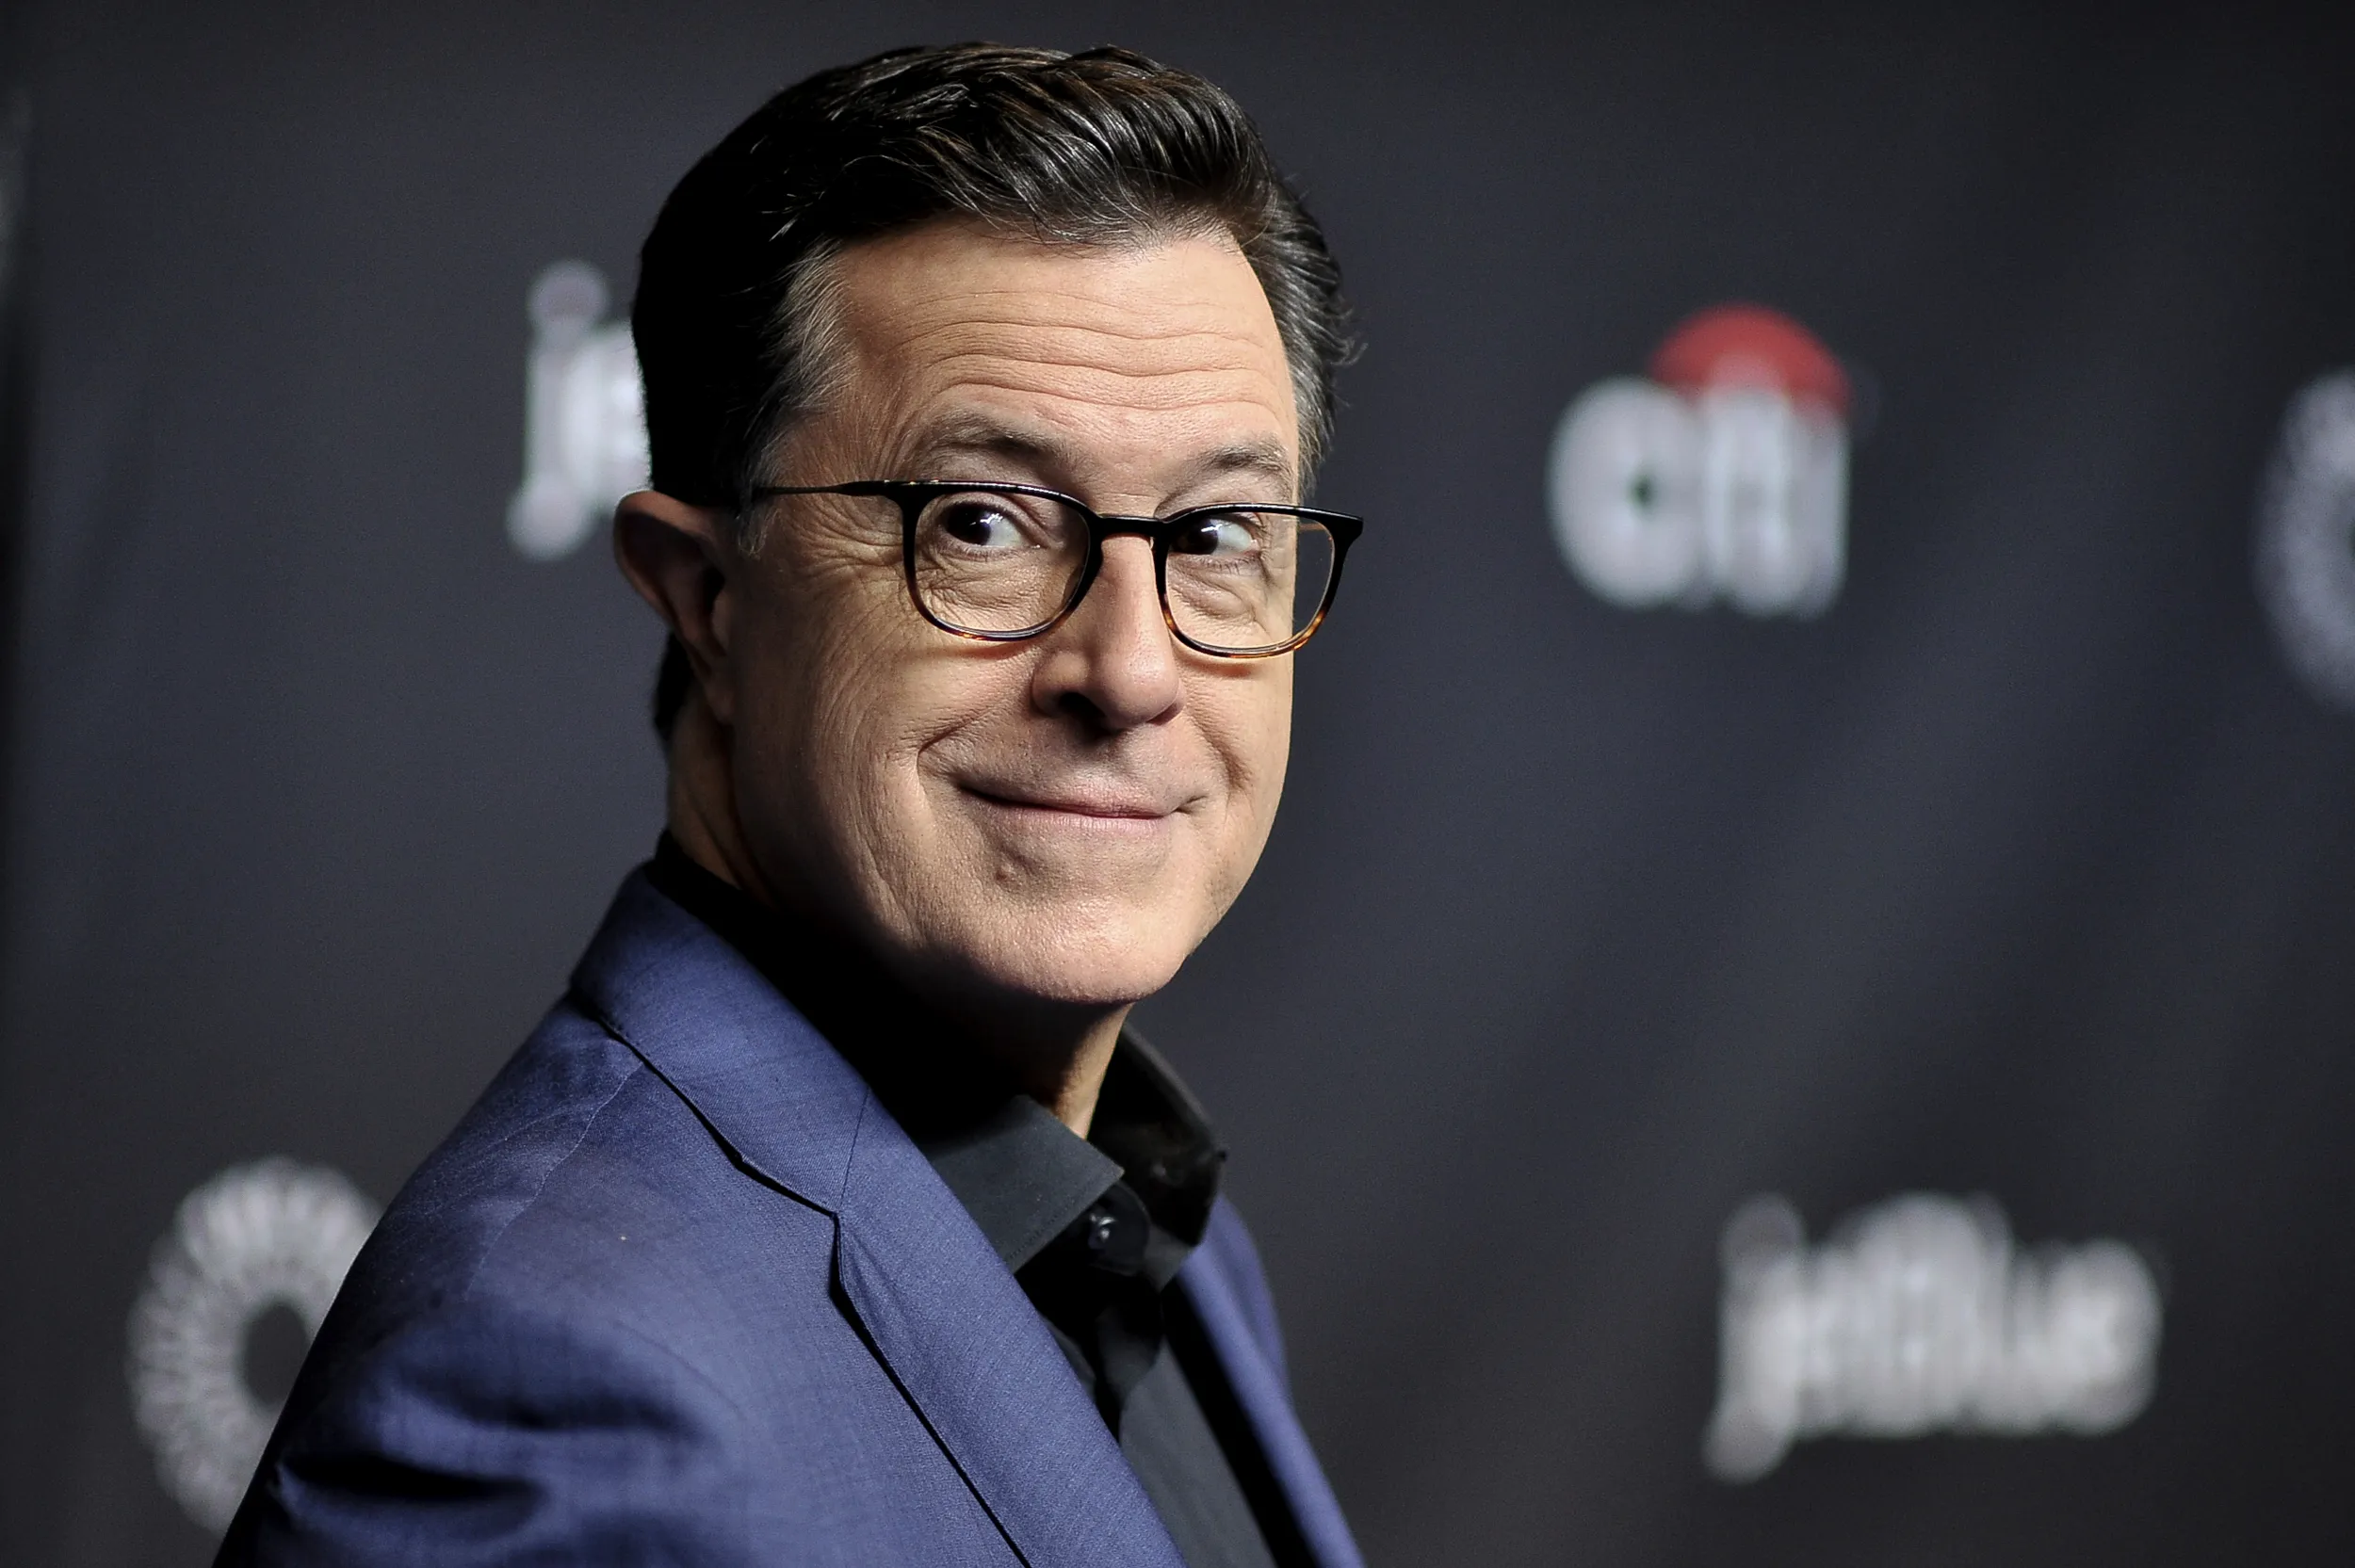 Stephen Colbert is the host of the late-night talk show.